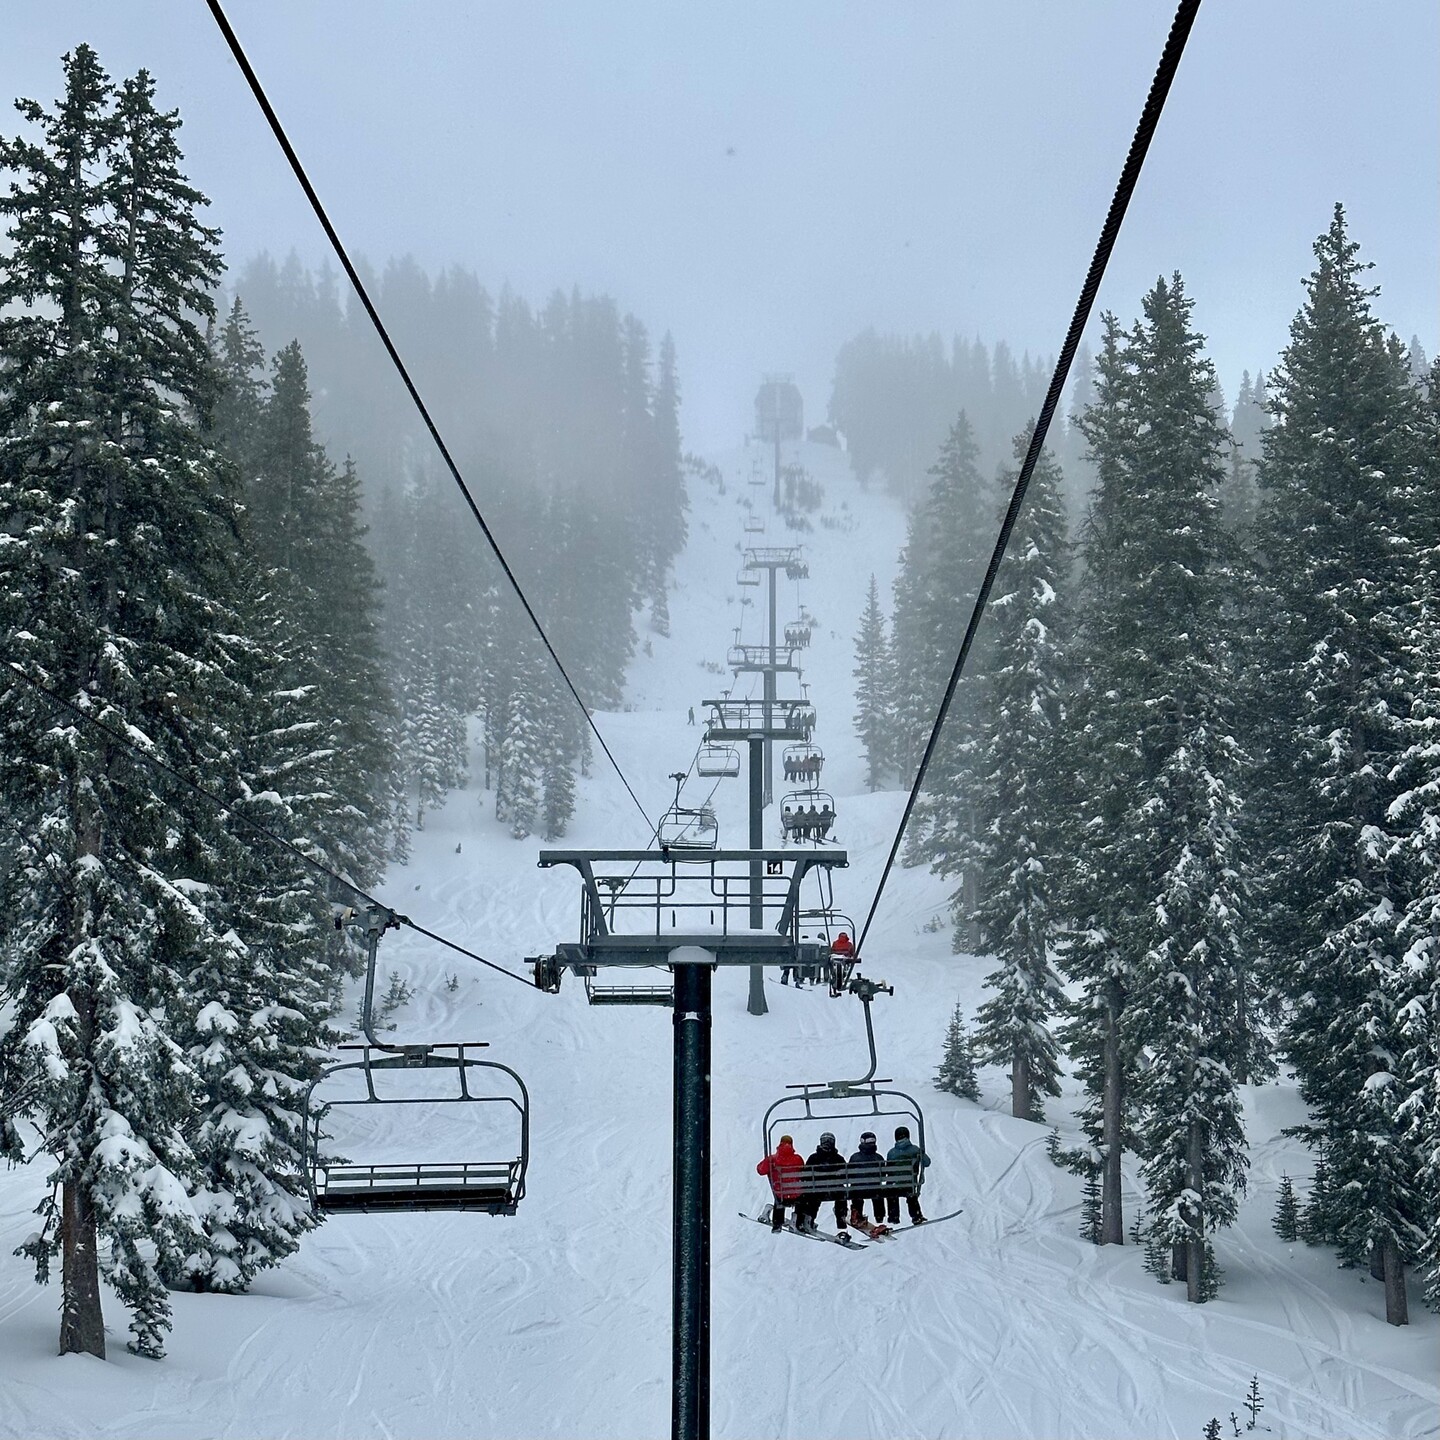 Photo from a chairlift looking up a mountain toward the top. Cloudy and snowy conditions with snow covered trees on both sides.